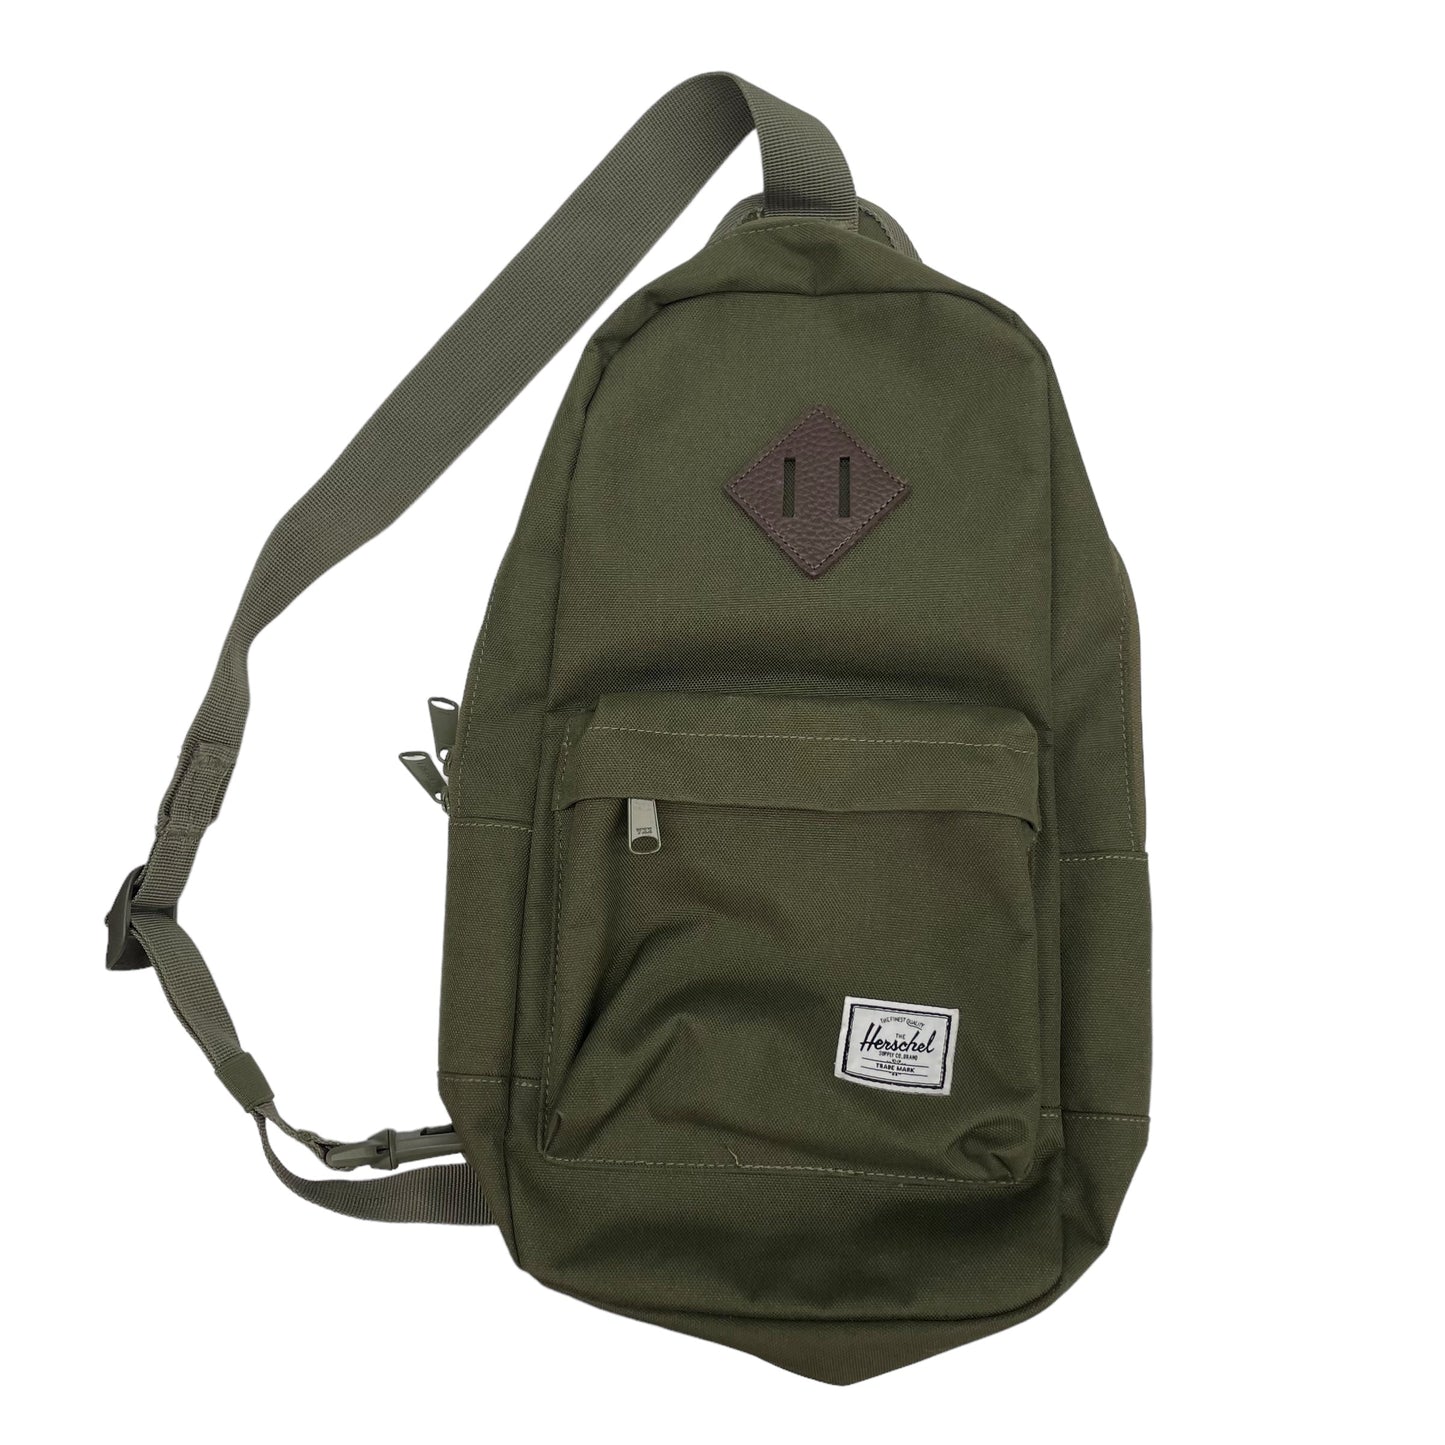 GREEN BACKPACK by HERSCHEL Size:SMALL